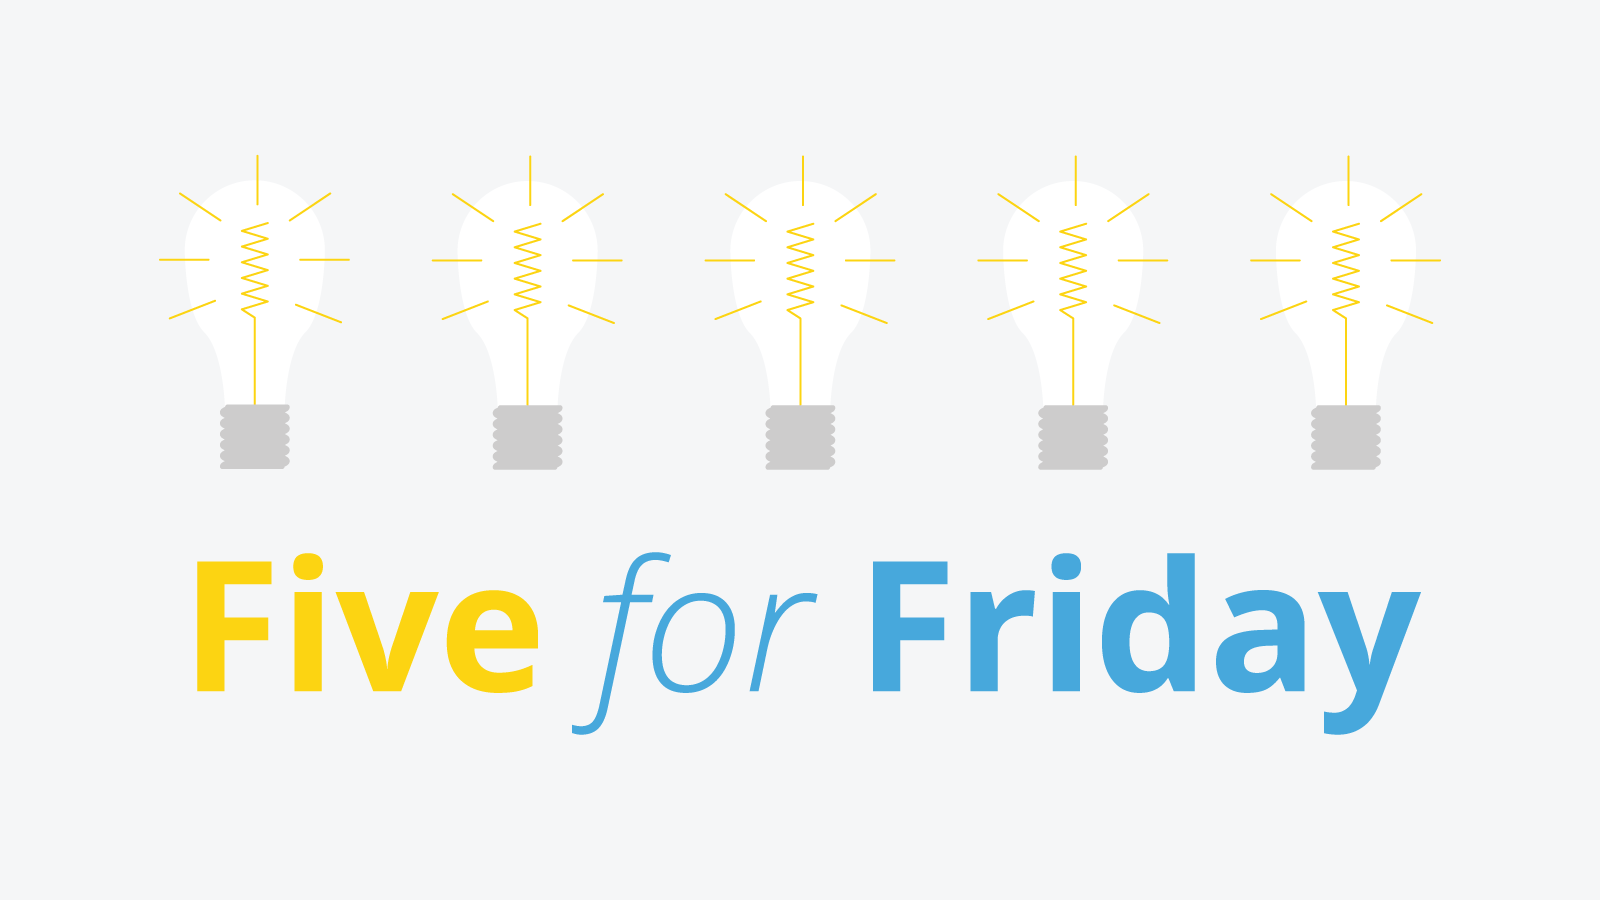 Five for Friday: Future of work